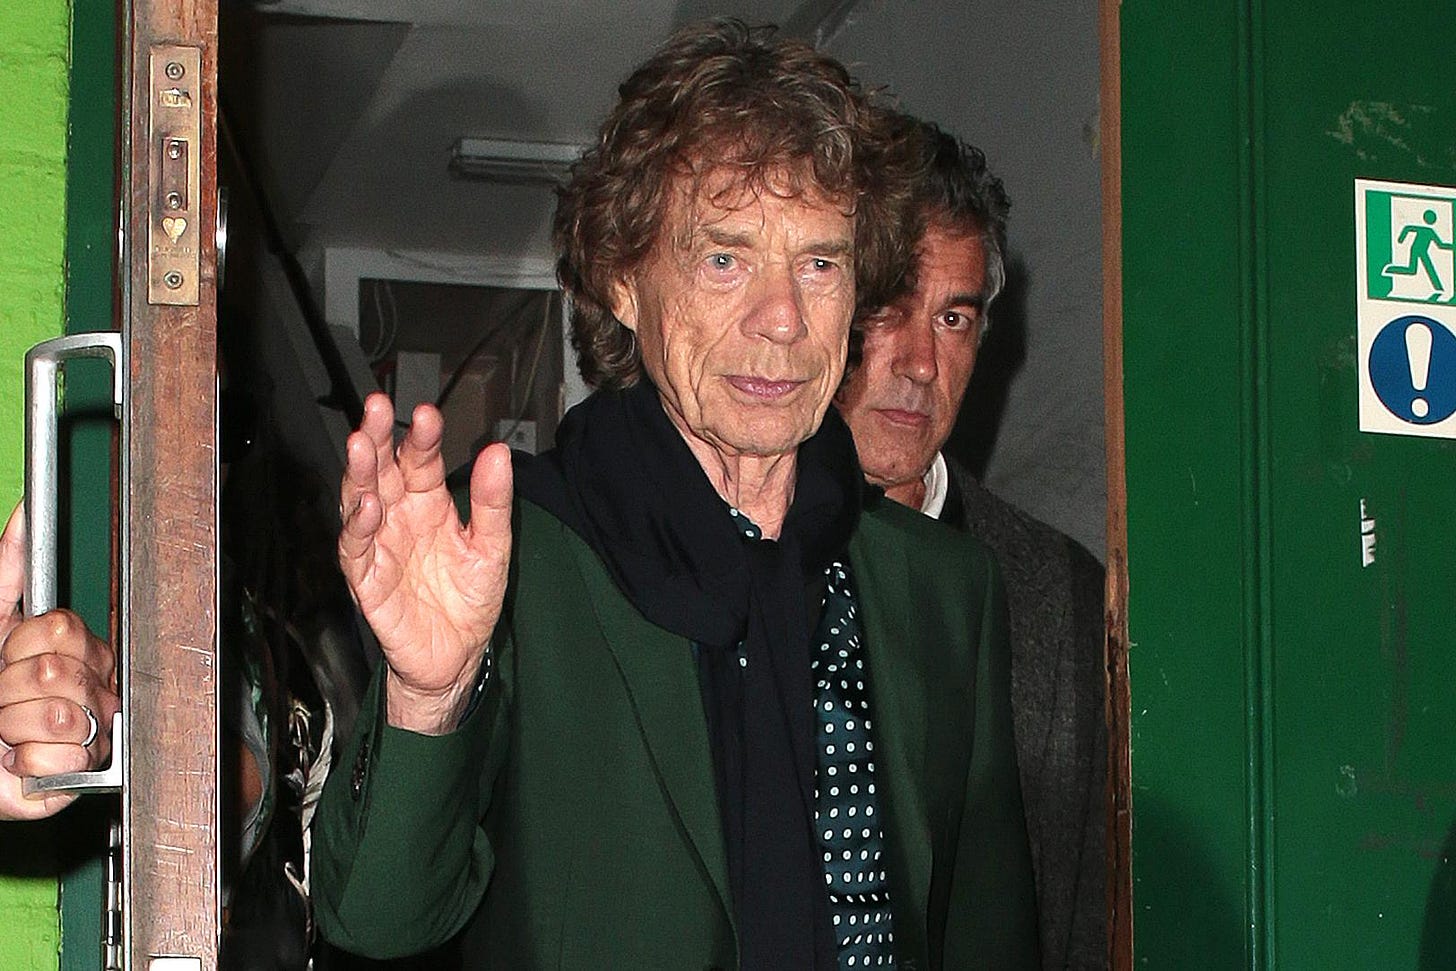 Mick Jagger's 80th birthday party: in pictures